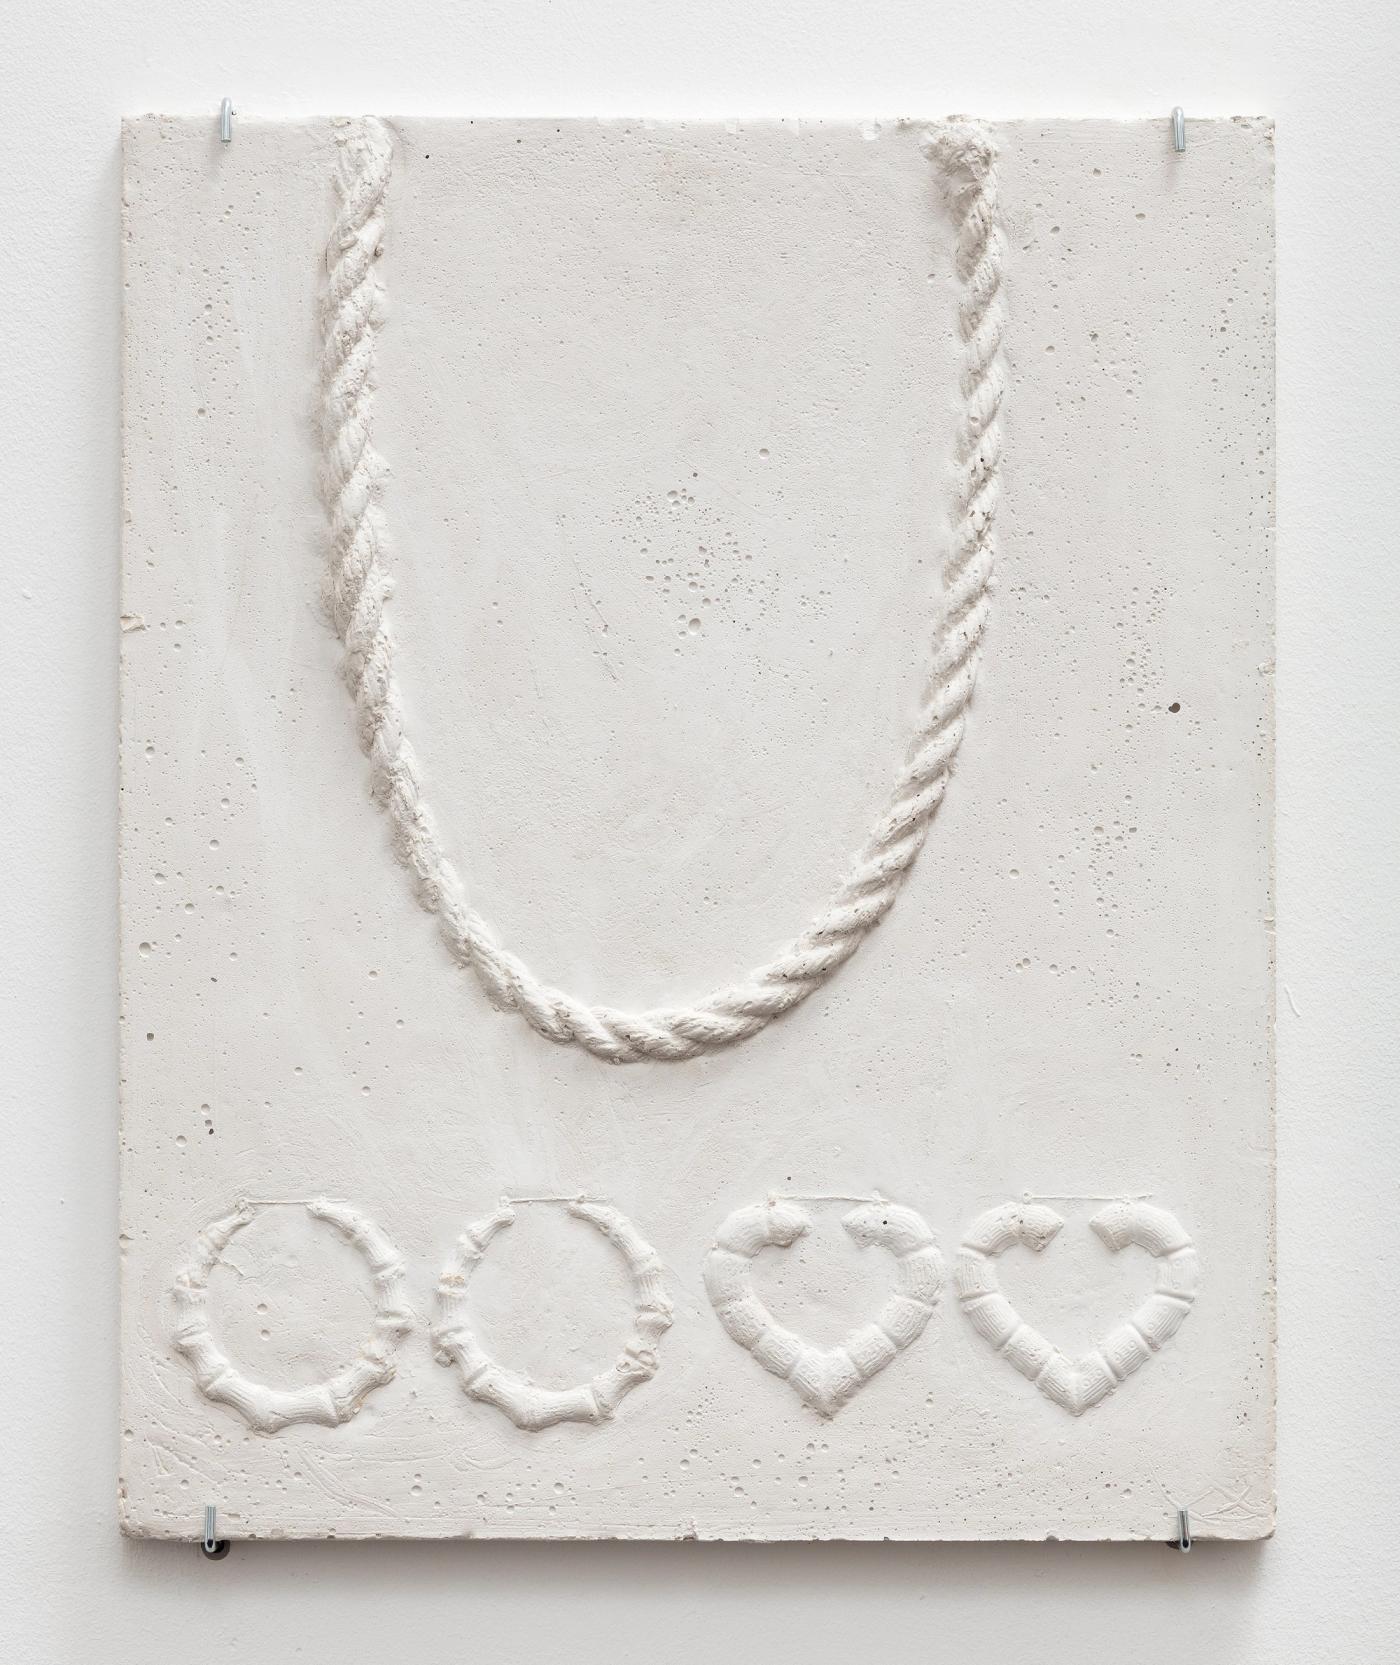 Image of Rope Chain and Two Pairs of Bamboo Earrings Arrangement Relief, 2018: Plaster